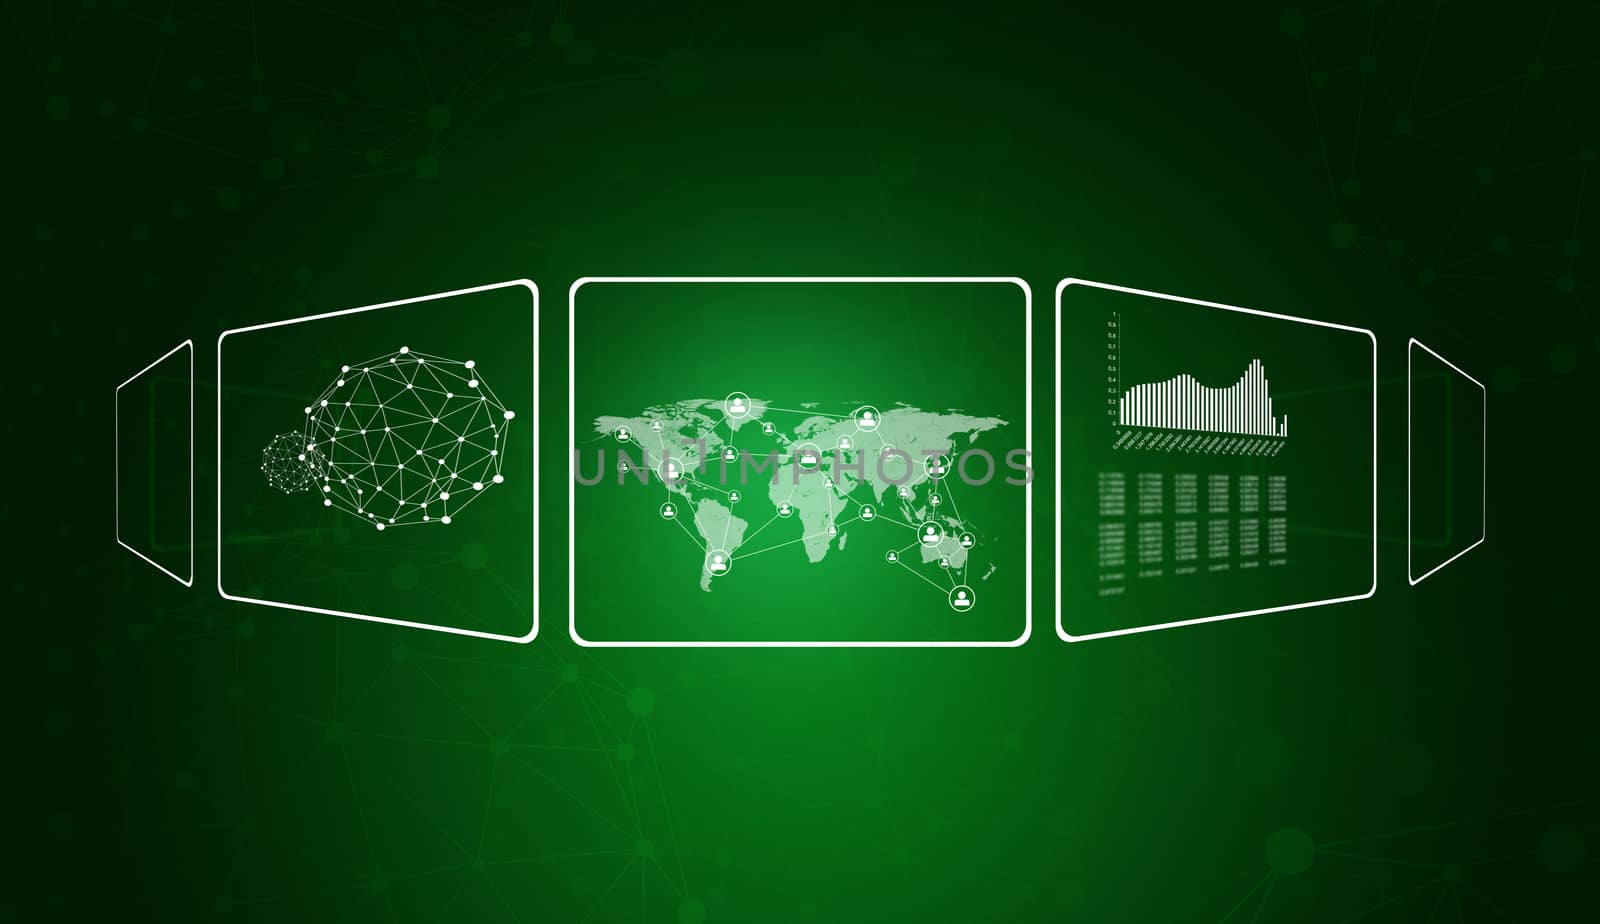 Transparent rectangles, network, wire-frame spheres and world map on green background